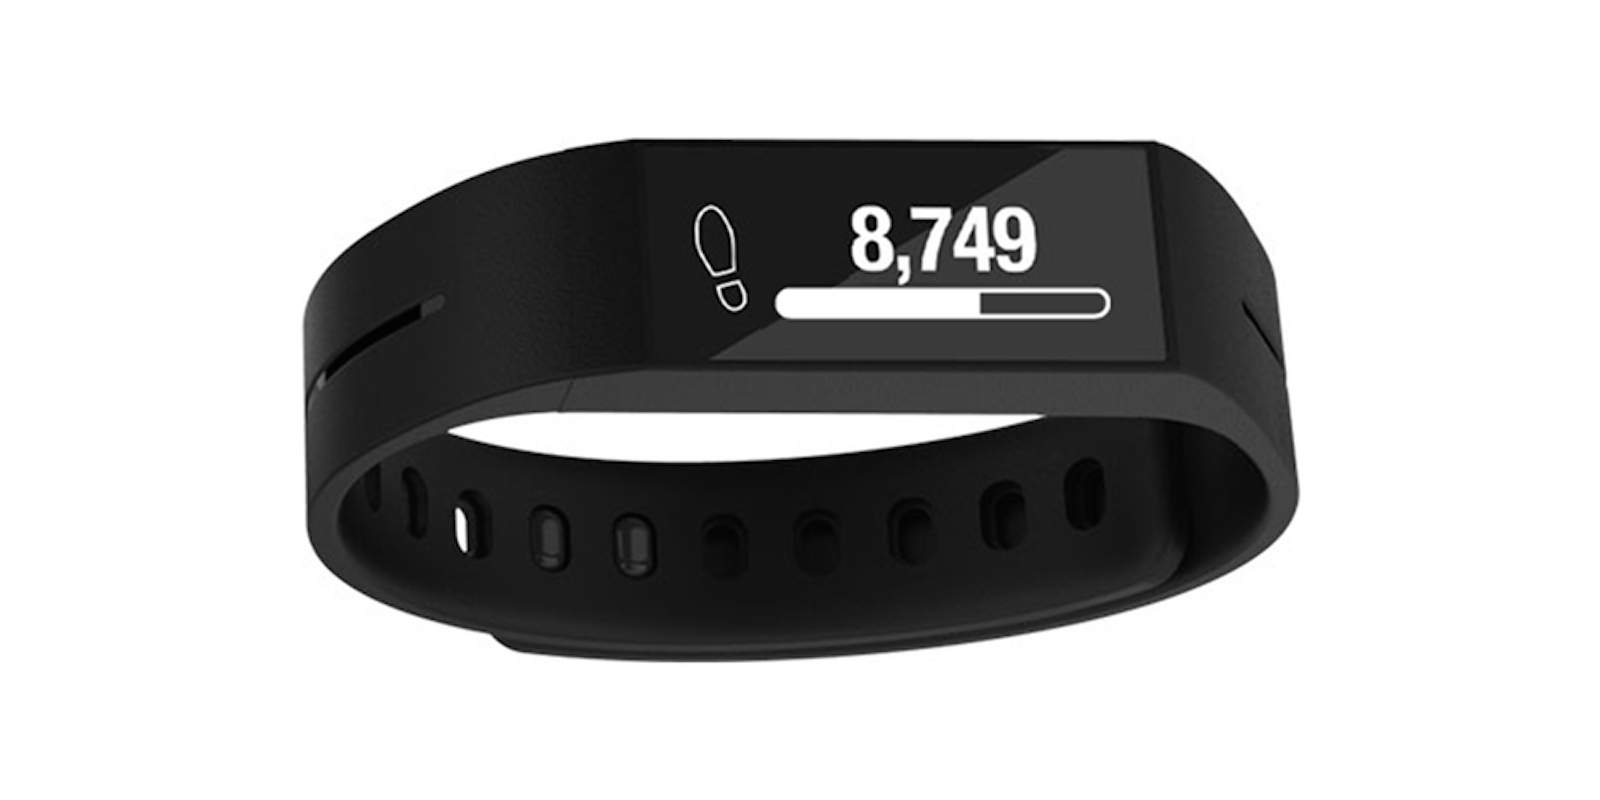 Striiv Touch Activity Tracking & Notification-Enabled Smartwatch